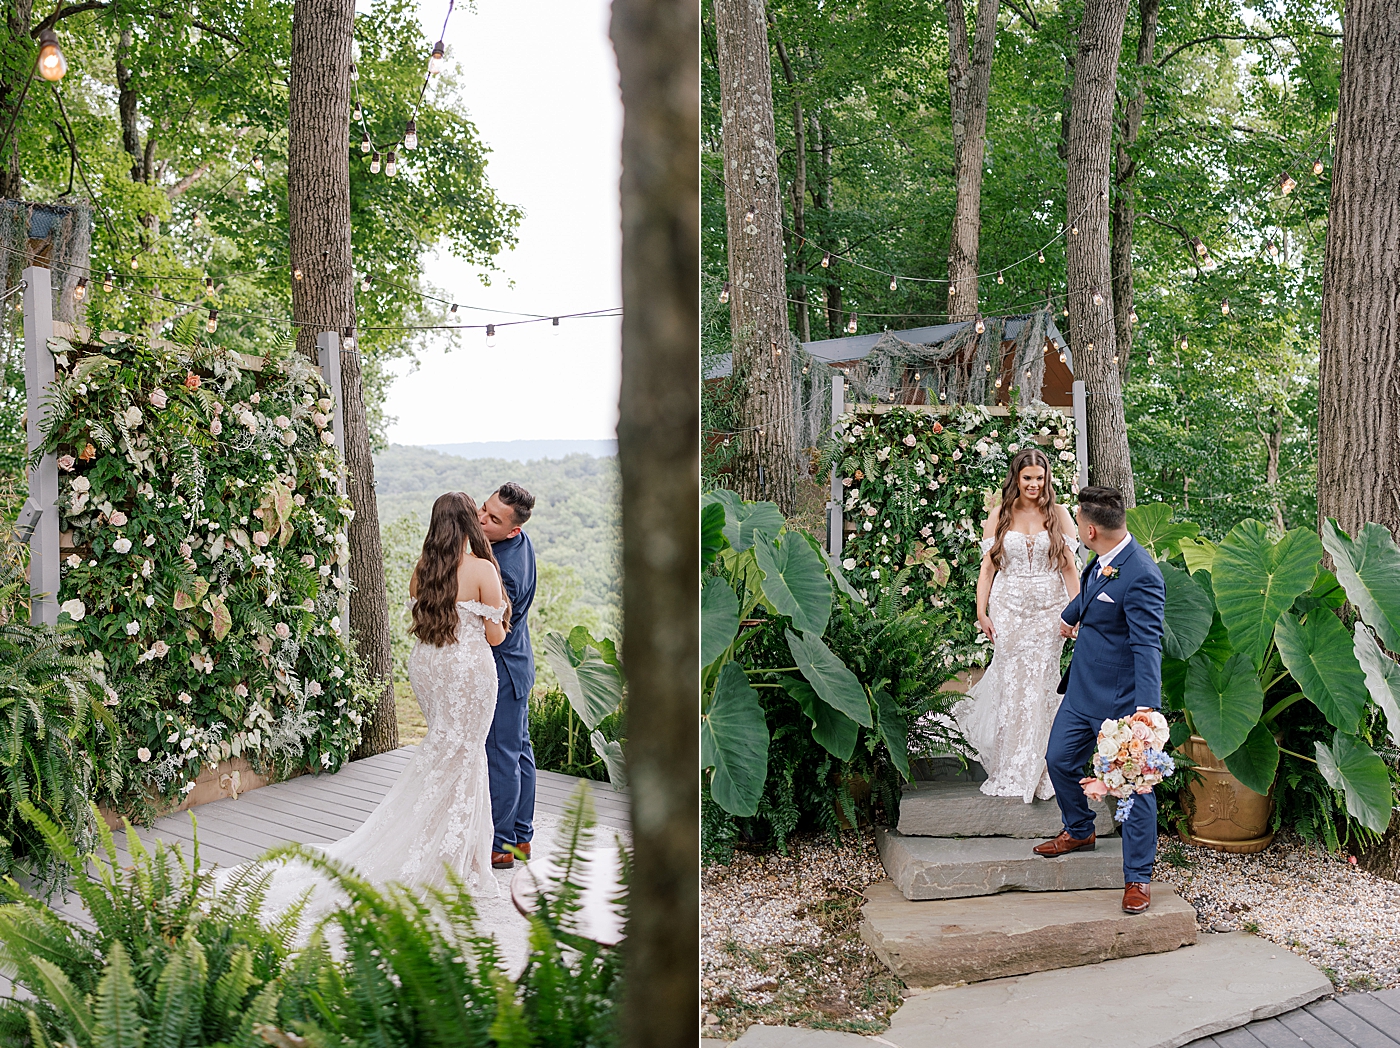 Bride and groom kiss at their ceremony location | Image by Hope Helmuth Photography 